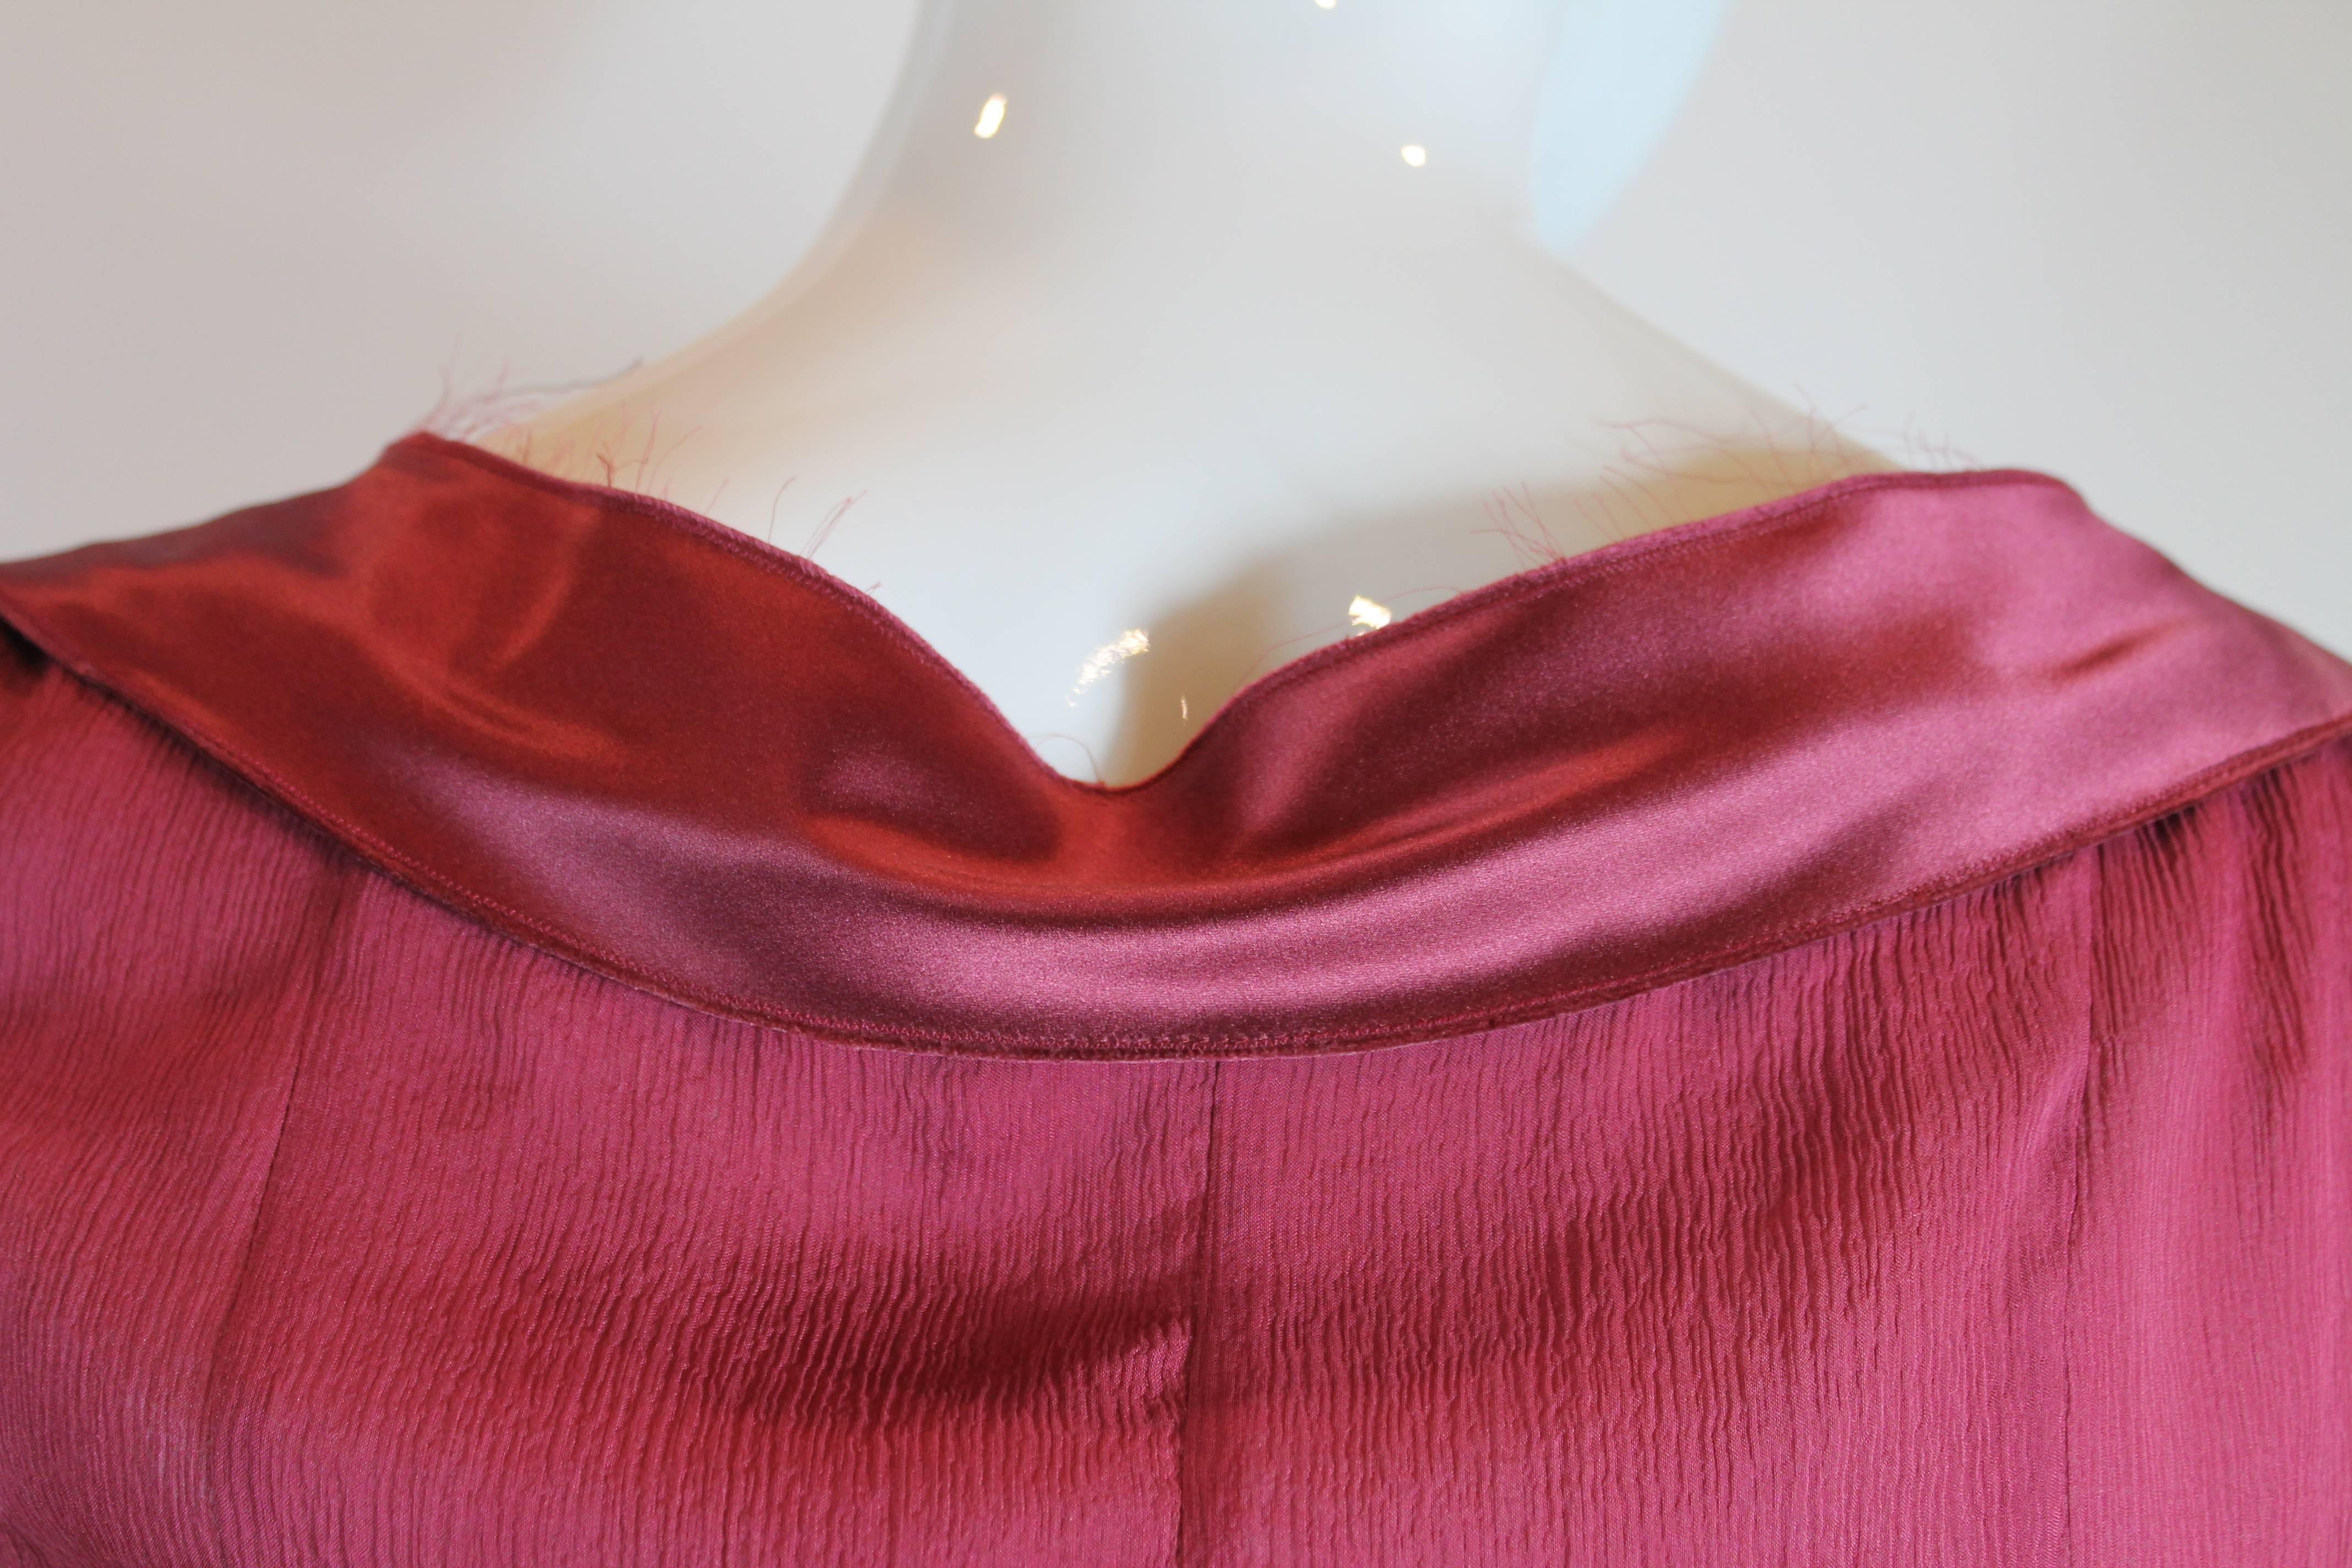 The beauty of Prada is in the details. This burgundy silk dress has the perfect combination of simplicity and style. Chiffon body trimmed in silk trim and bow. Nude mesh peeks out of front bow - black beaded applique. Hidden side zipper. Size 42.